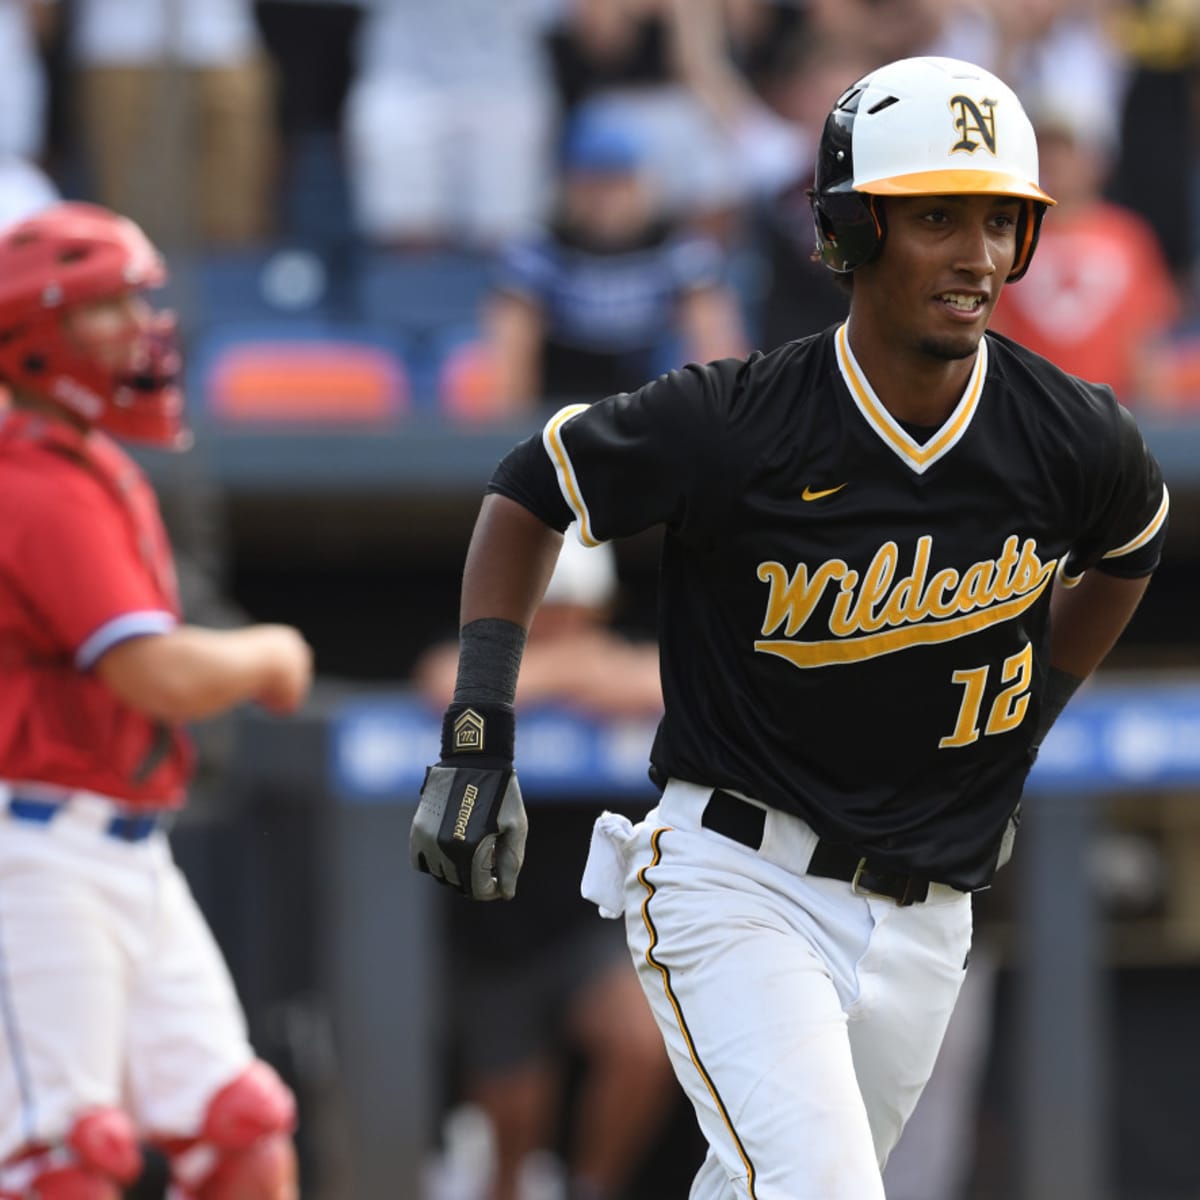 Ohio's top high school baseball players: Meet the state's best outfielders  - Sports Illustrated High School News, Analysis and More